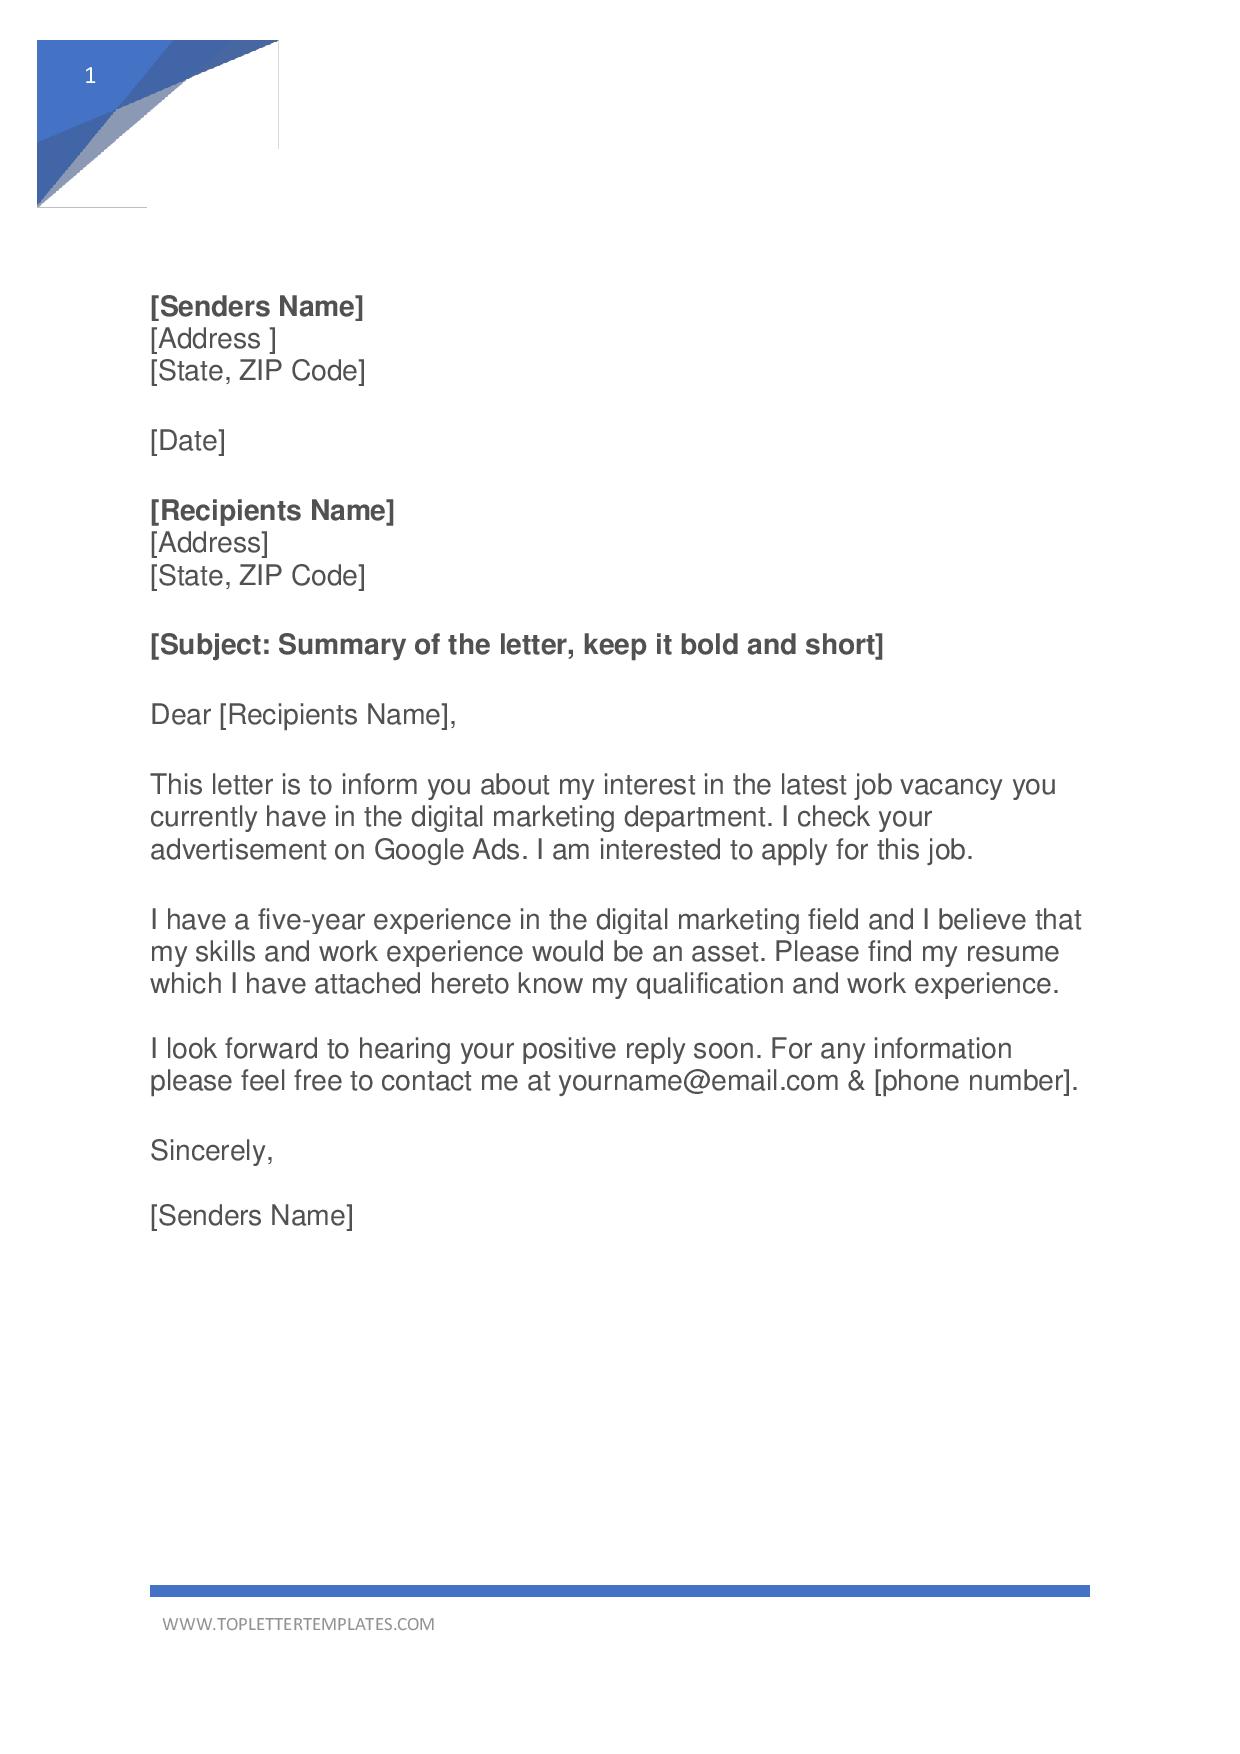 Best Application Letter For Job Vacancy from toplettertemplates.com